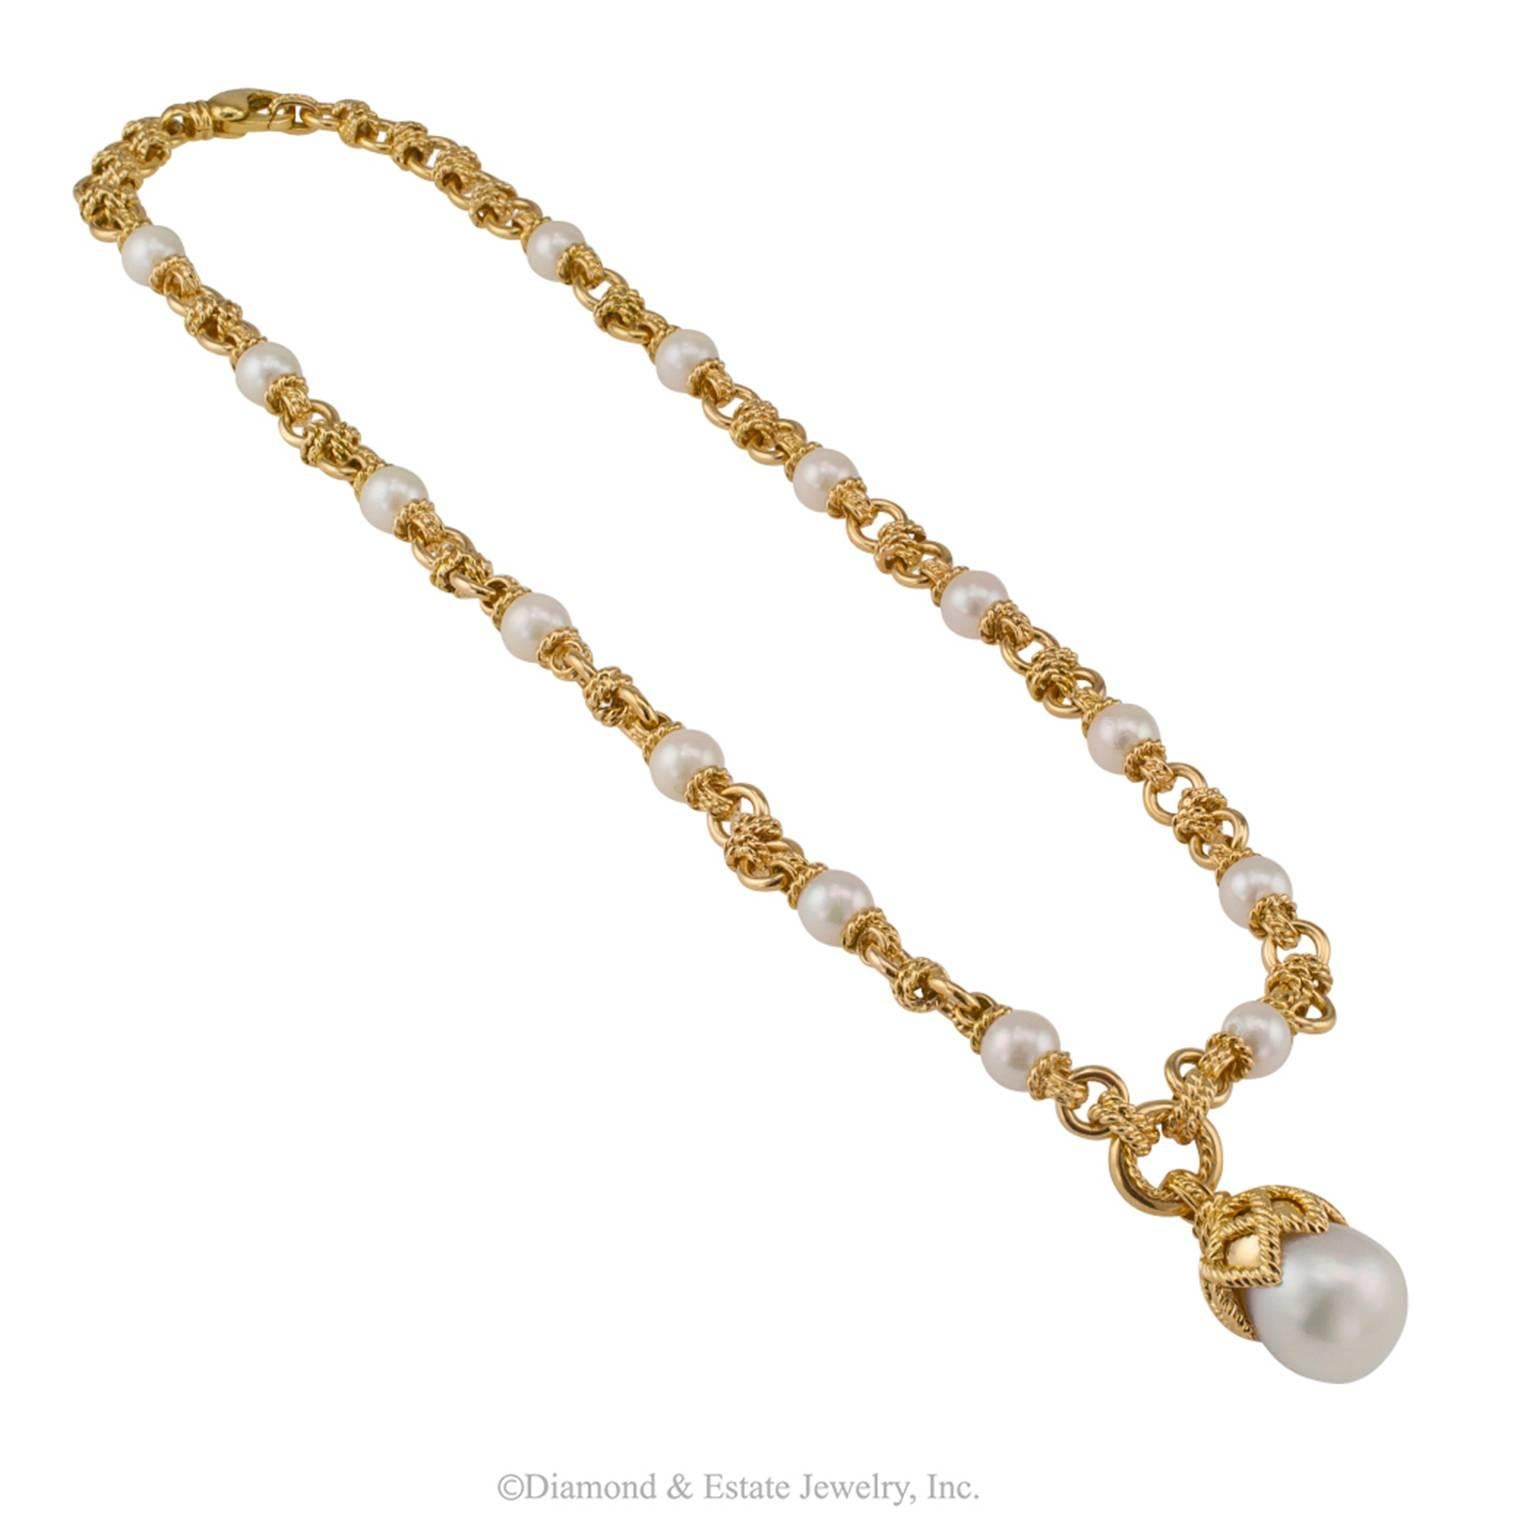 Cultured Pearl South Sea Pearl Gold Necklace

Cultured pearl and cultured south sea pearl pendant 18-karat gold necklace circa 1990.  Fourteen cultured pearls measuring approximately 8 mm, spaced at equal intervals, between richly textured corded